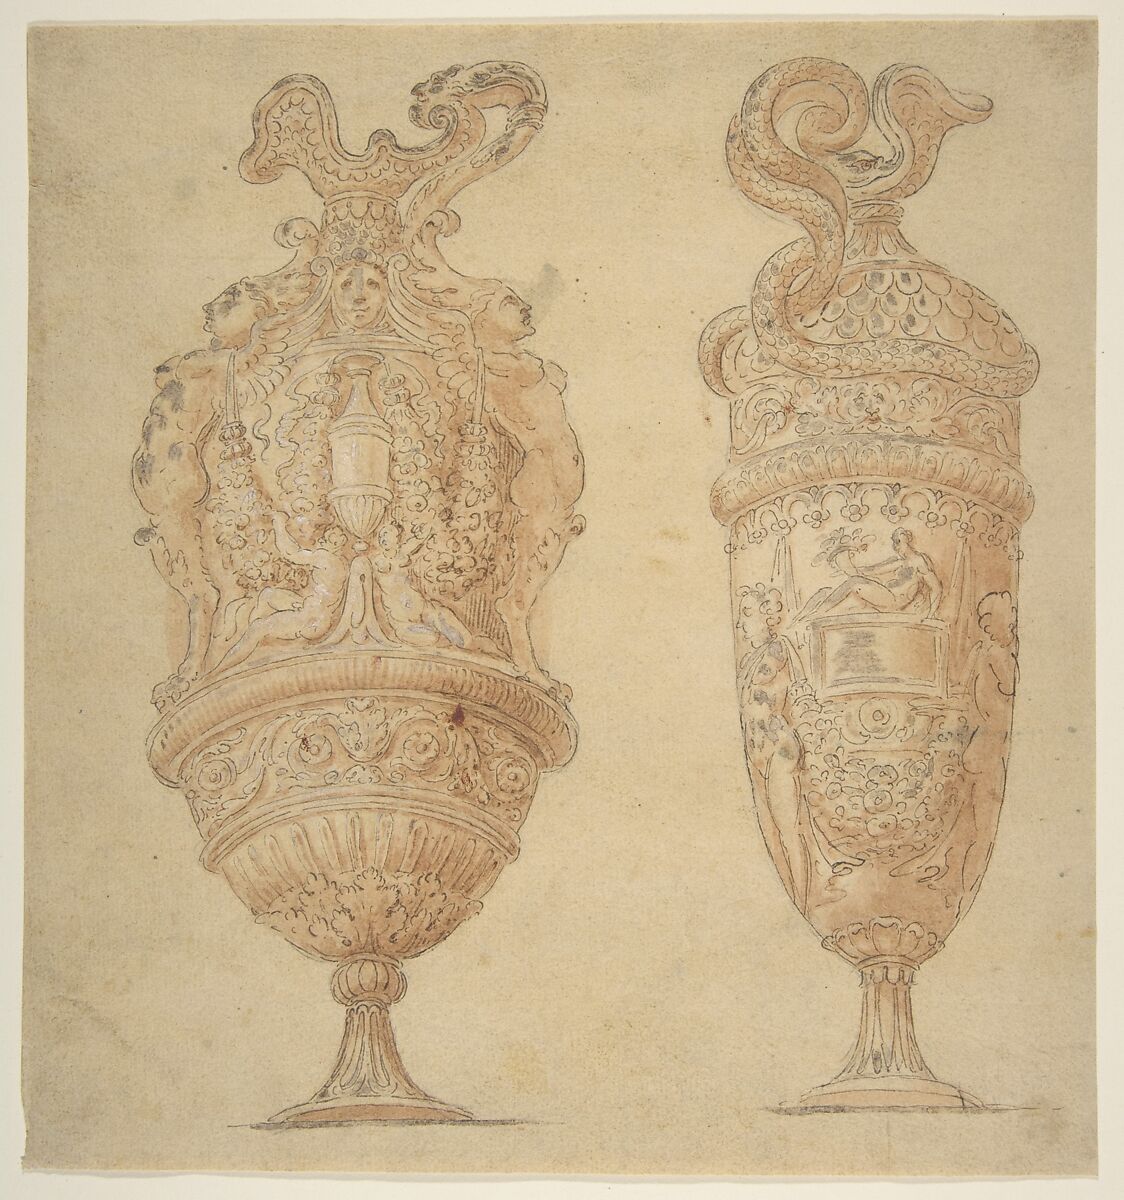 Two Urns Decorated with Human Figures, Animals and Garlands, After Polidoro da Caravaggio (Italian, Caravaggio ca. 1499–ca. 1543 Messina), Pen and brown ink, brush with brown and gray wash highlighted with white gouache over traces of graphite 